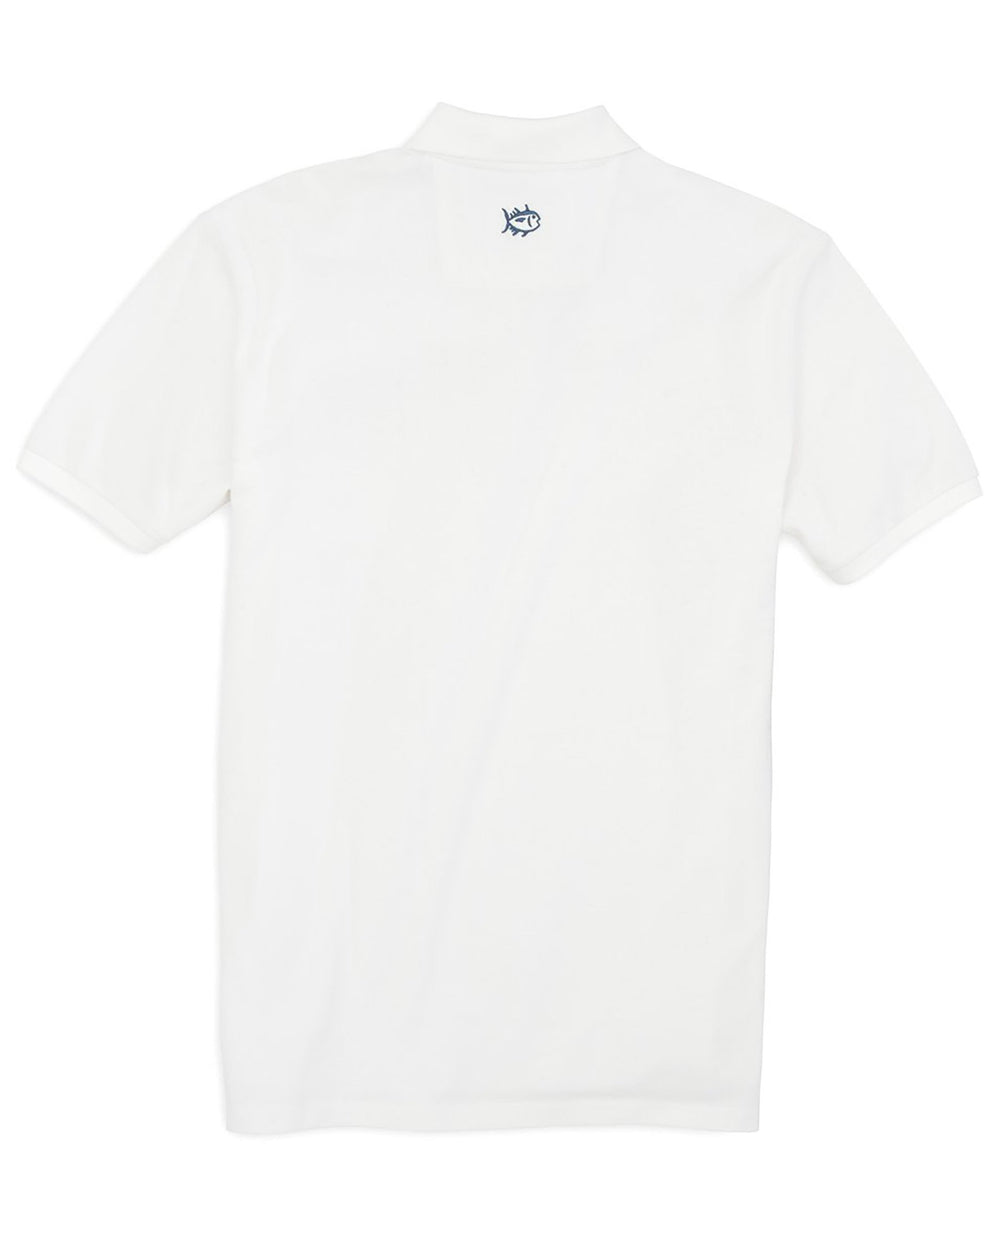 The back view of the Men's White Georgia Southern Pique Polo Shirt by Southern Tide - Classic White